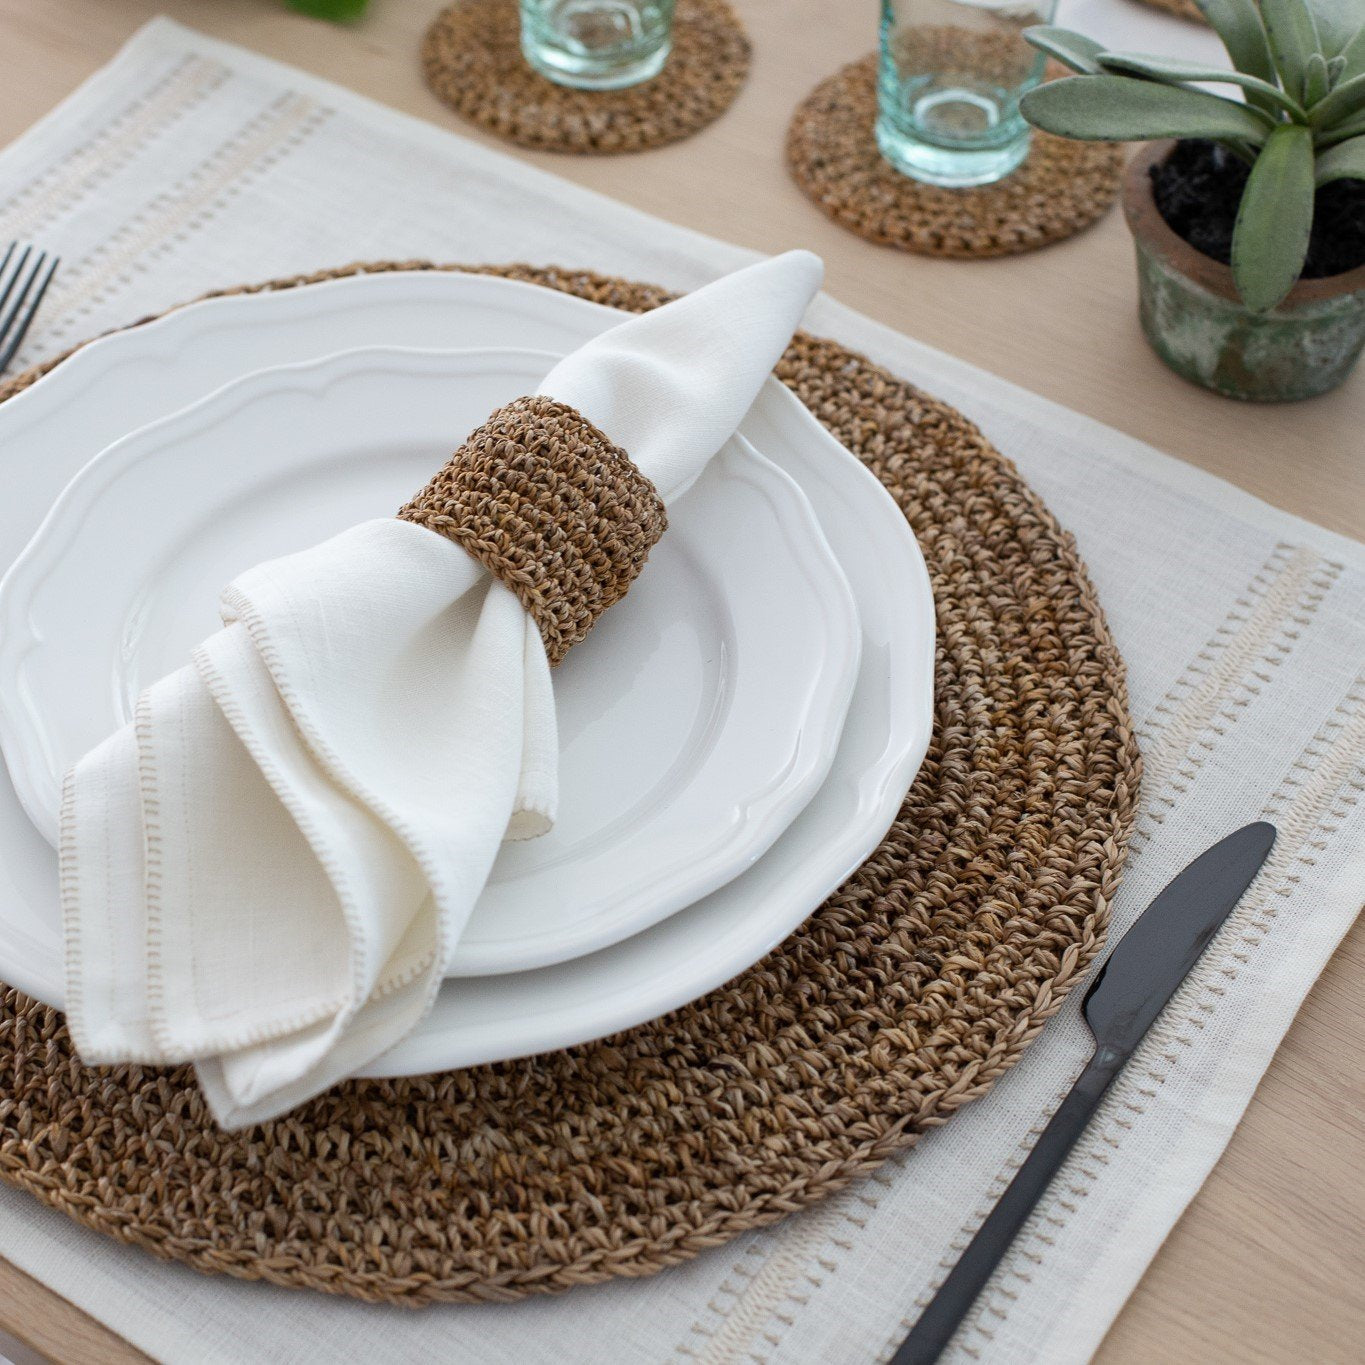 Handwoven round banana fiber placemat from artha collections